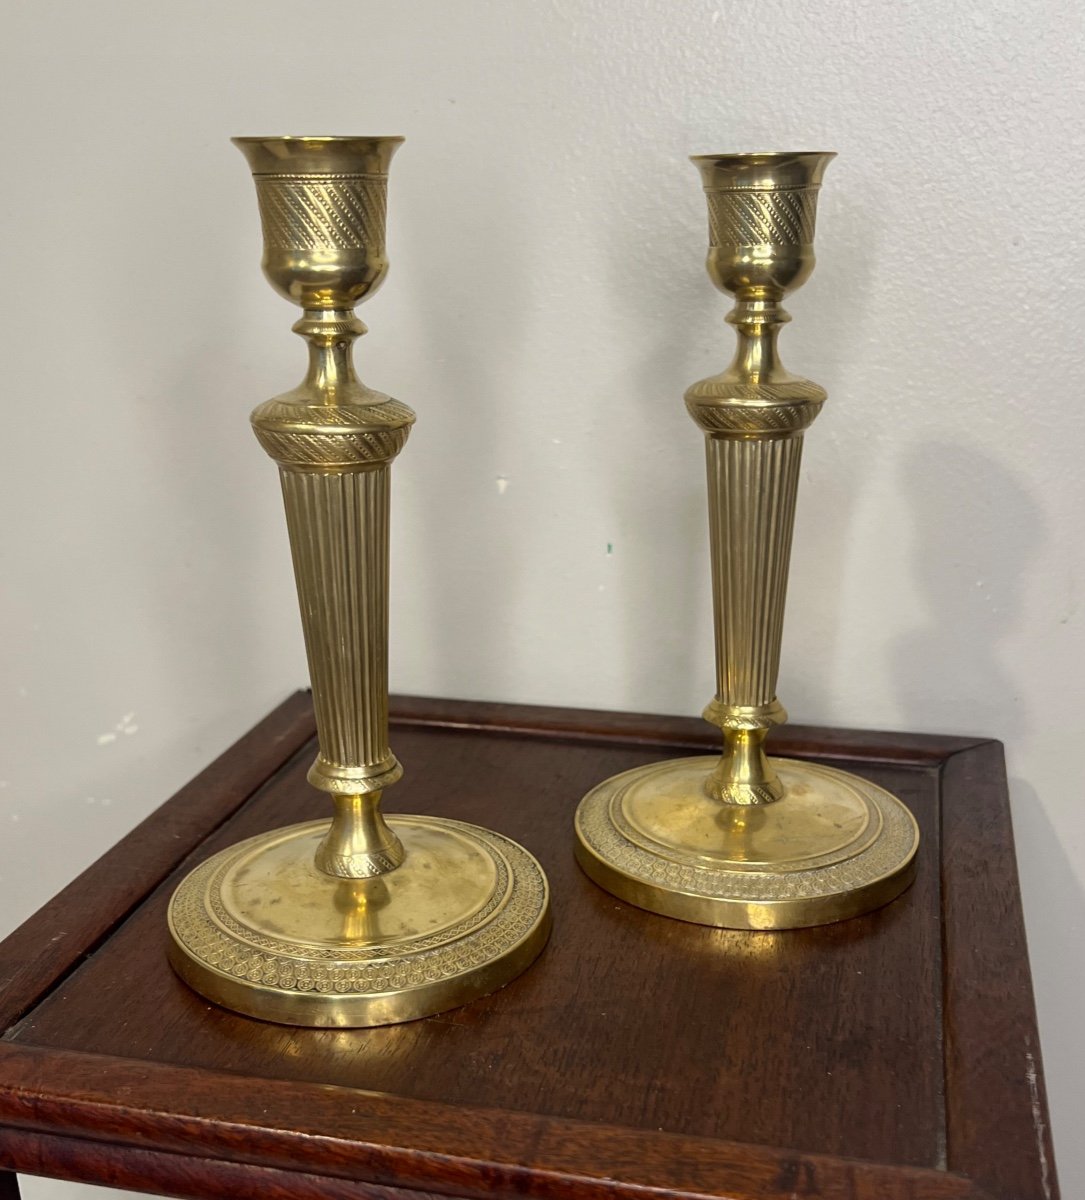 Pair Of Candlesticks, Chiseled Bronze, Empire Period